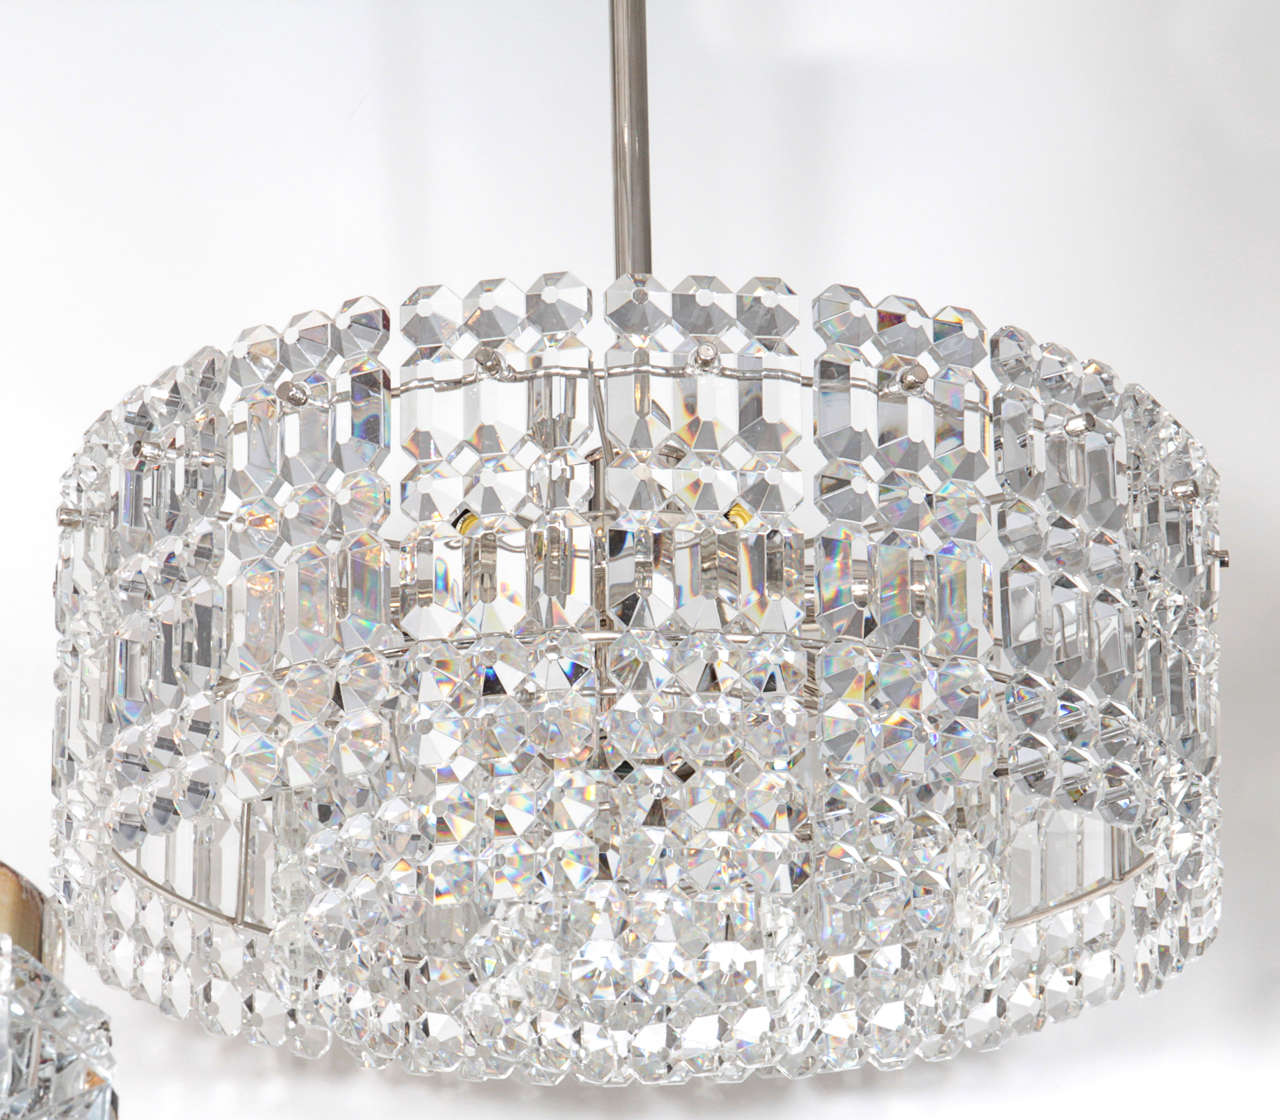 Dramatic drum chandelier composed of three layers of rectangular 
faceted crystal prisms on a polished nickel frame by Kinkeldey.

Crystal body measures 7.75 inches tall. 7 bulbs.